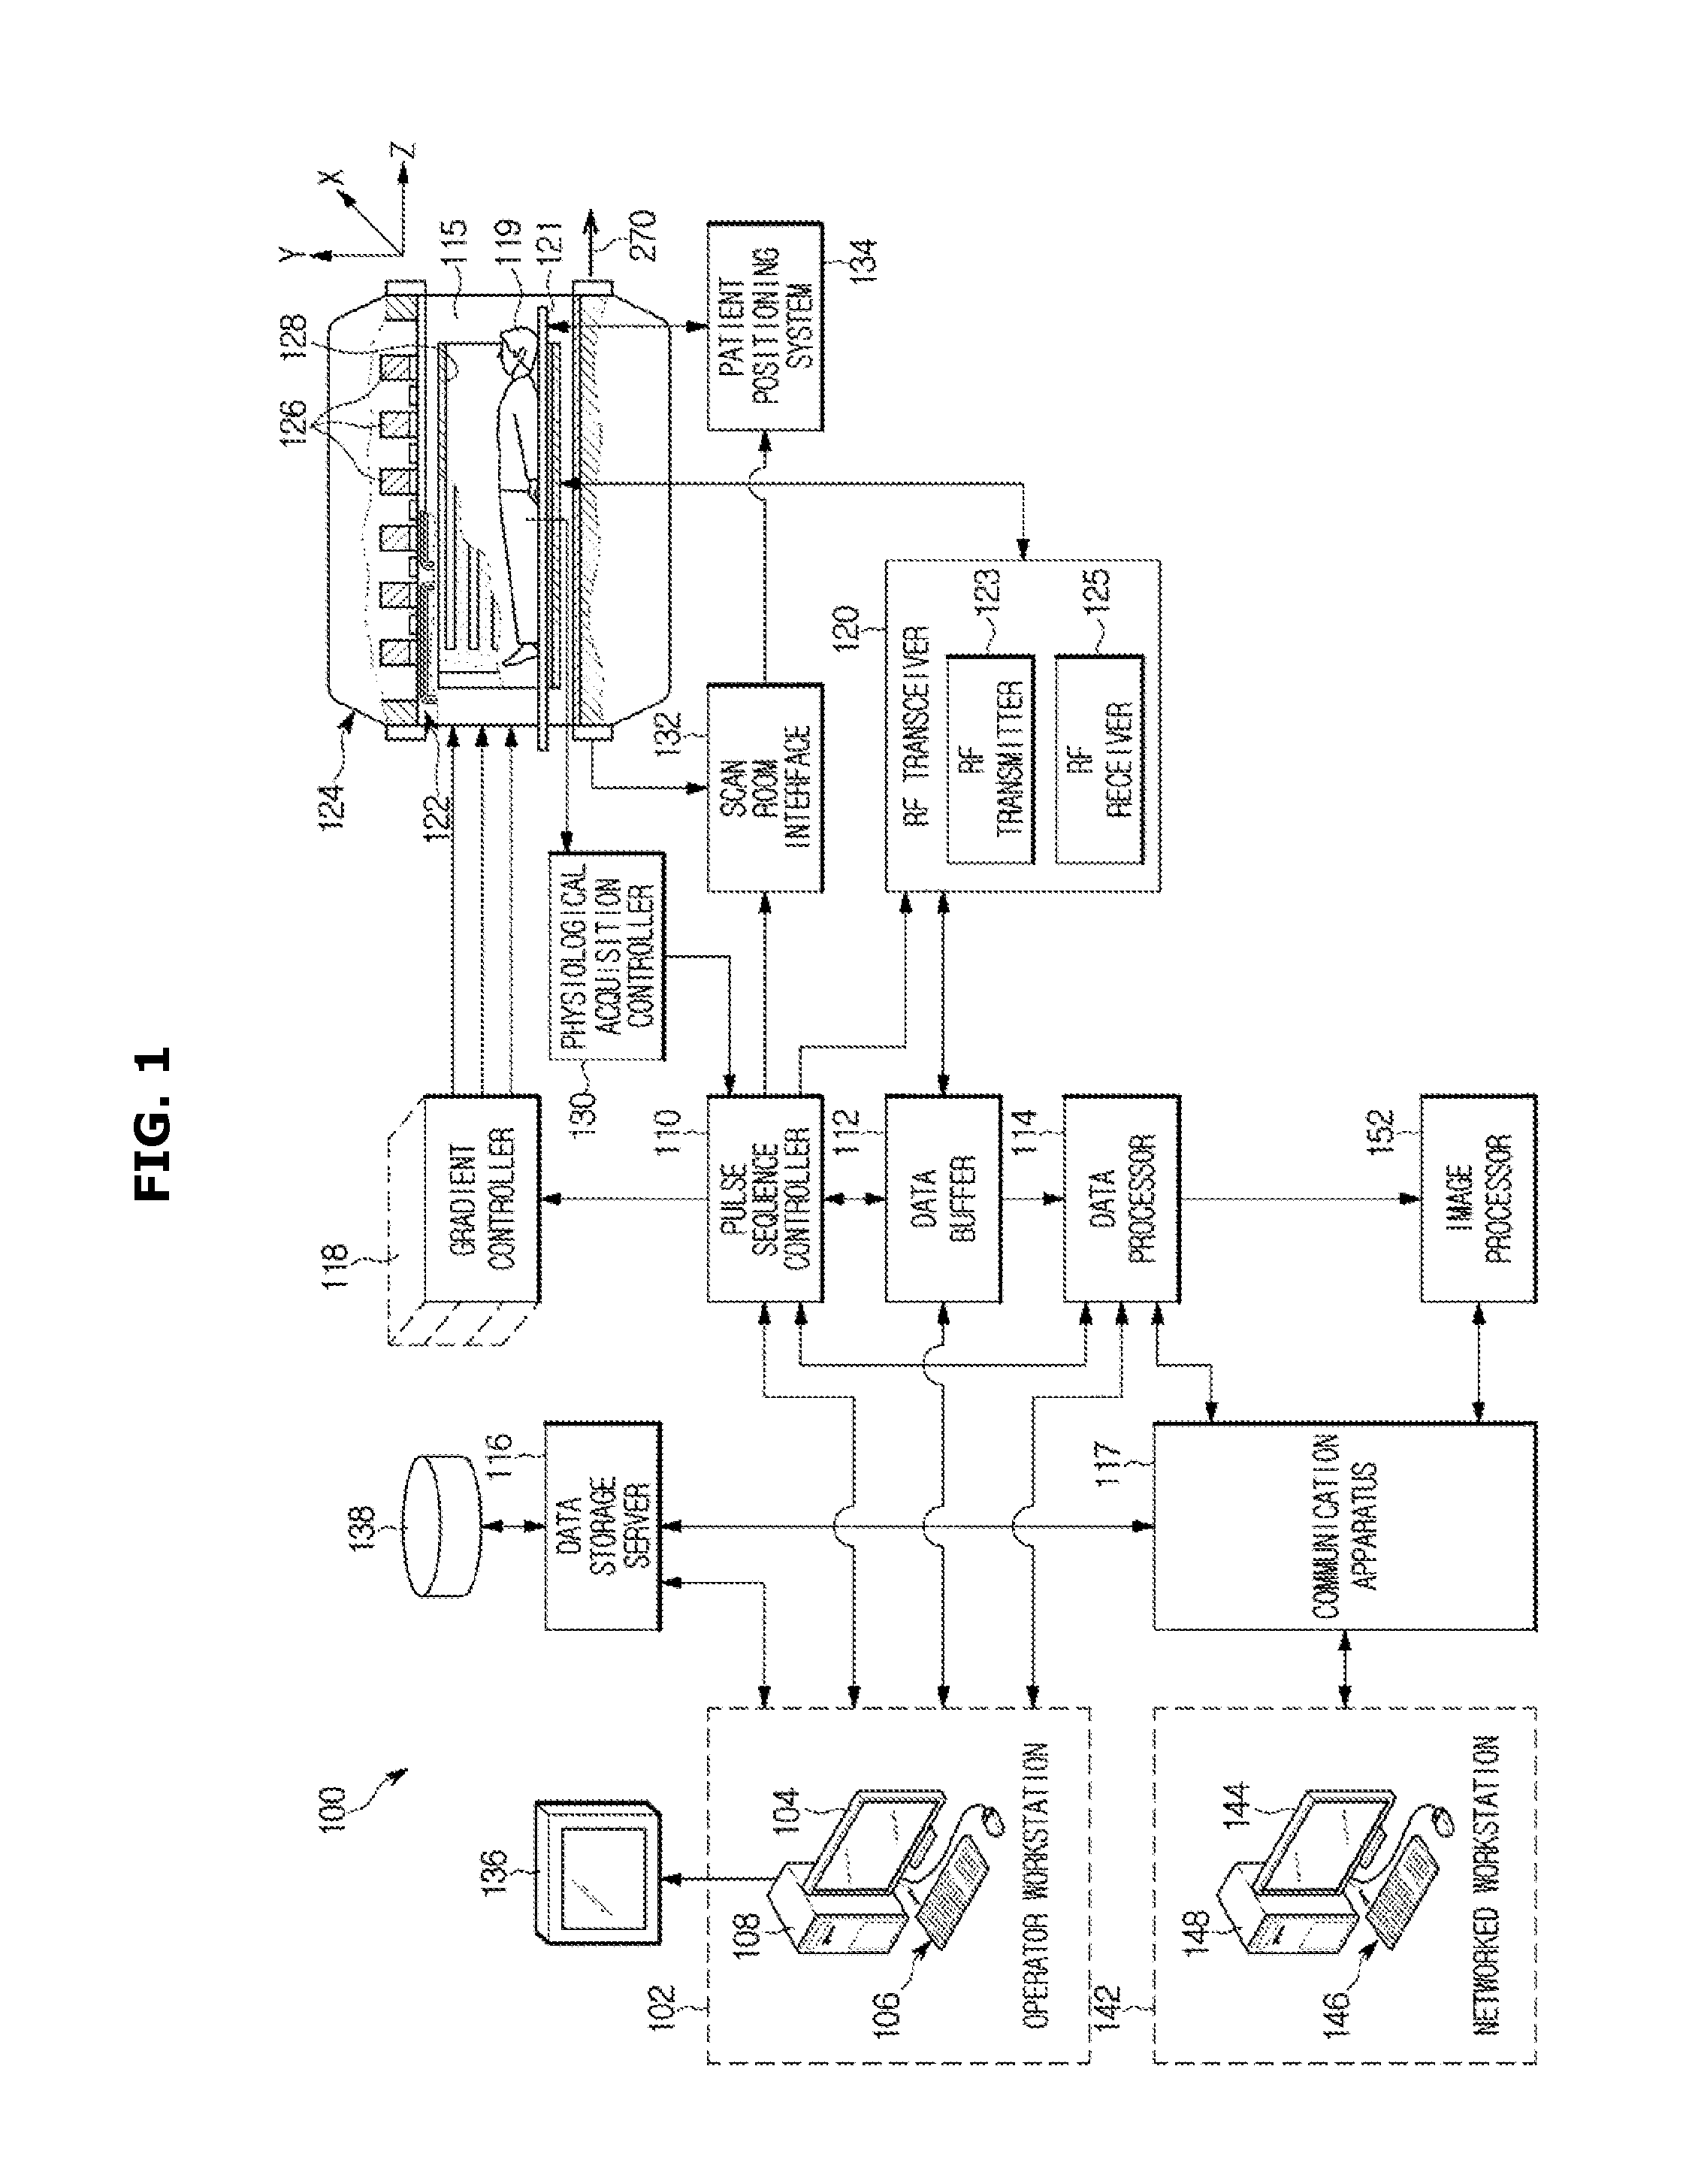 System and method for tissue characterization using multislice magnetic resonance imaging